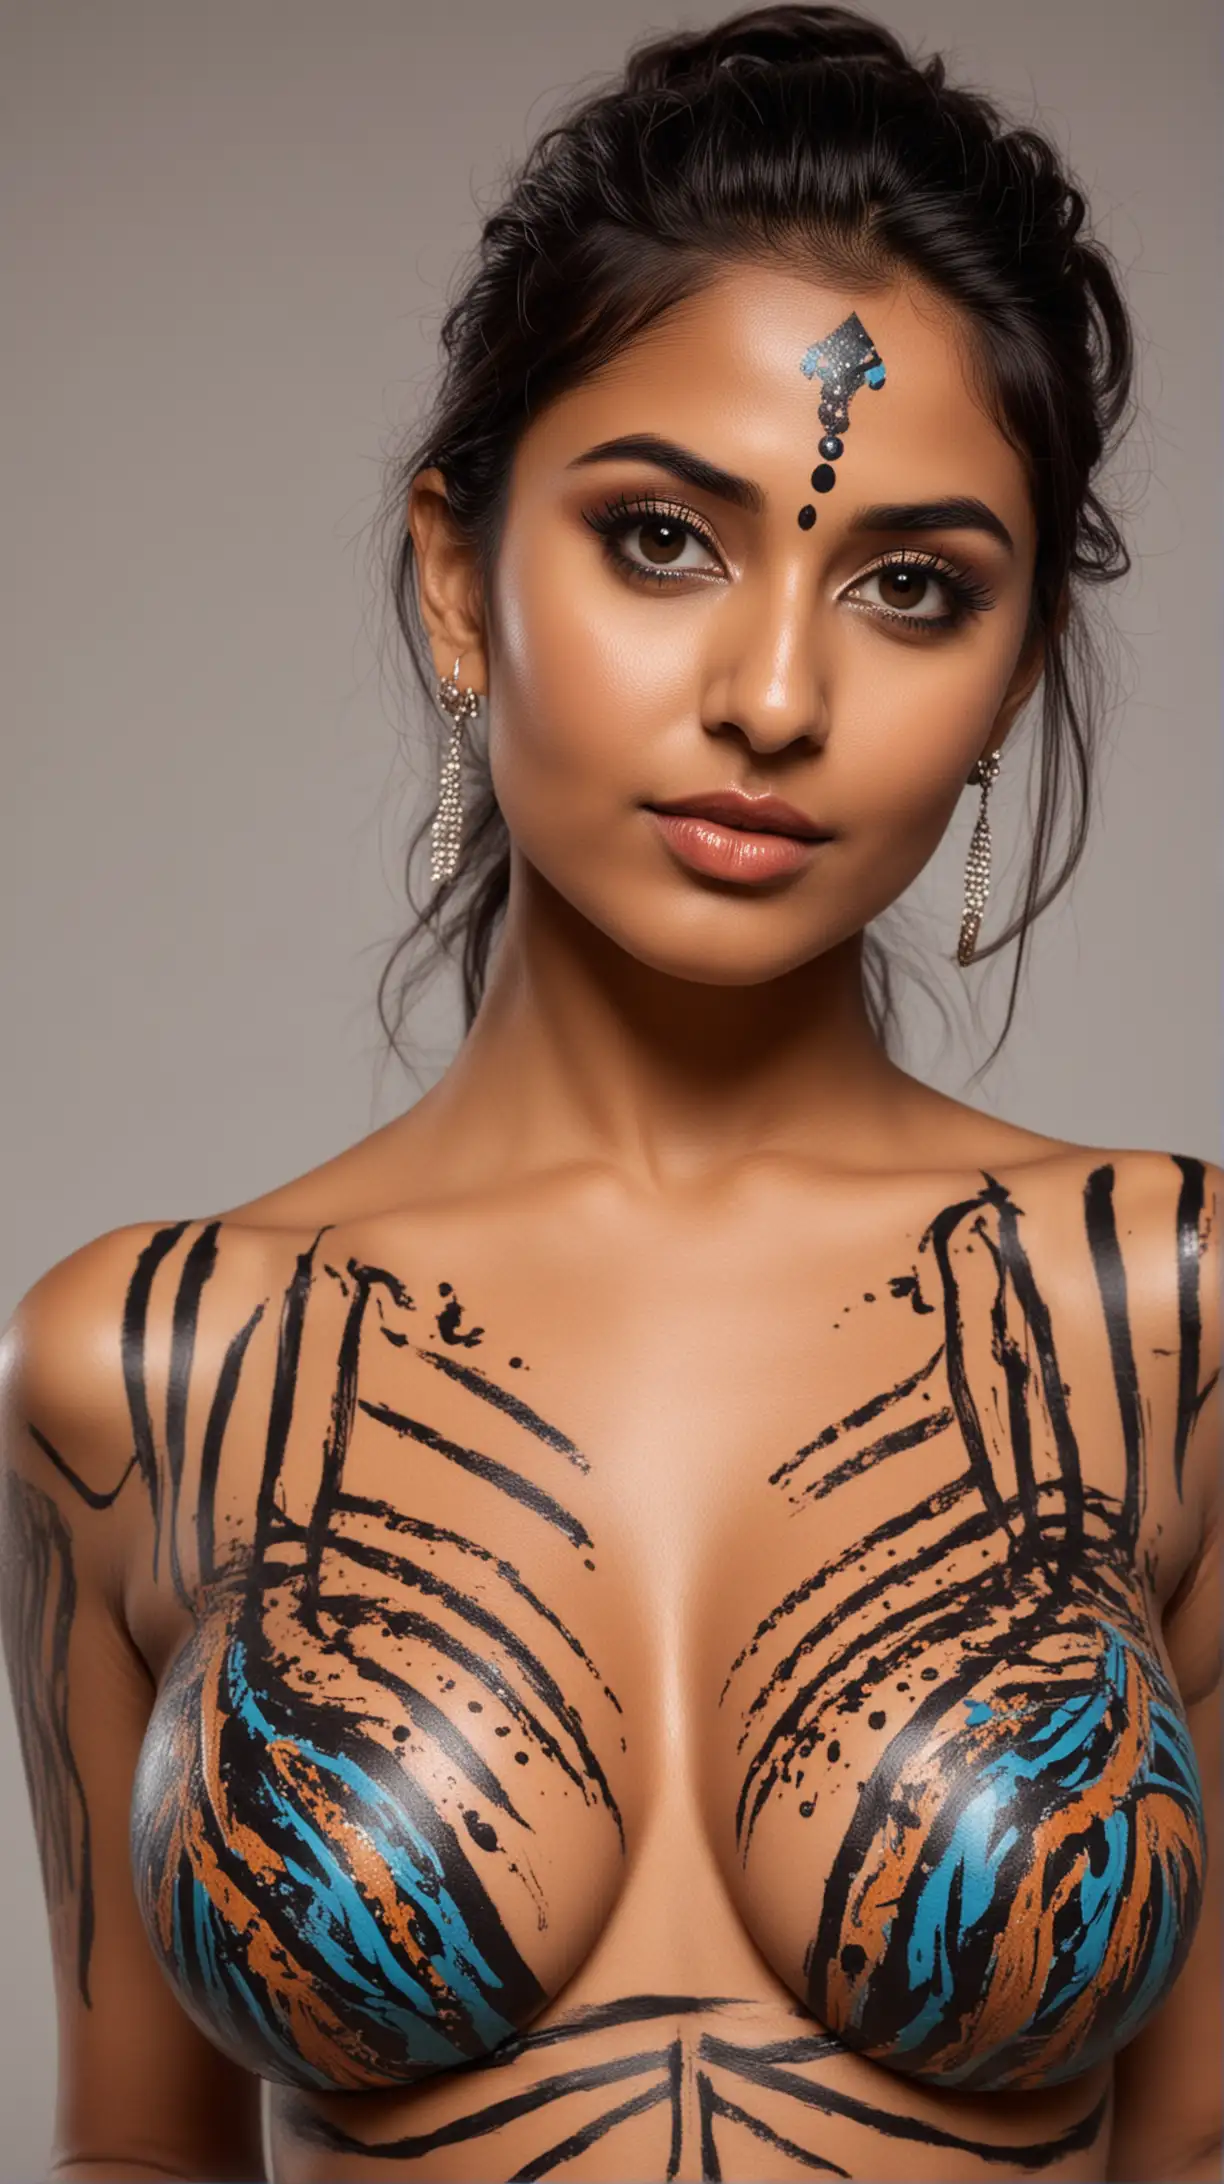 Stunning Indian Woman with Body Paint at Closeup Photoshoot